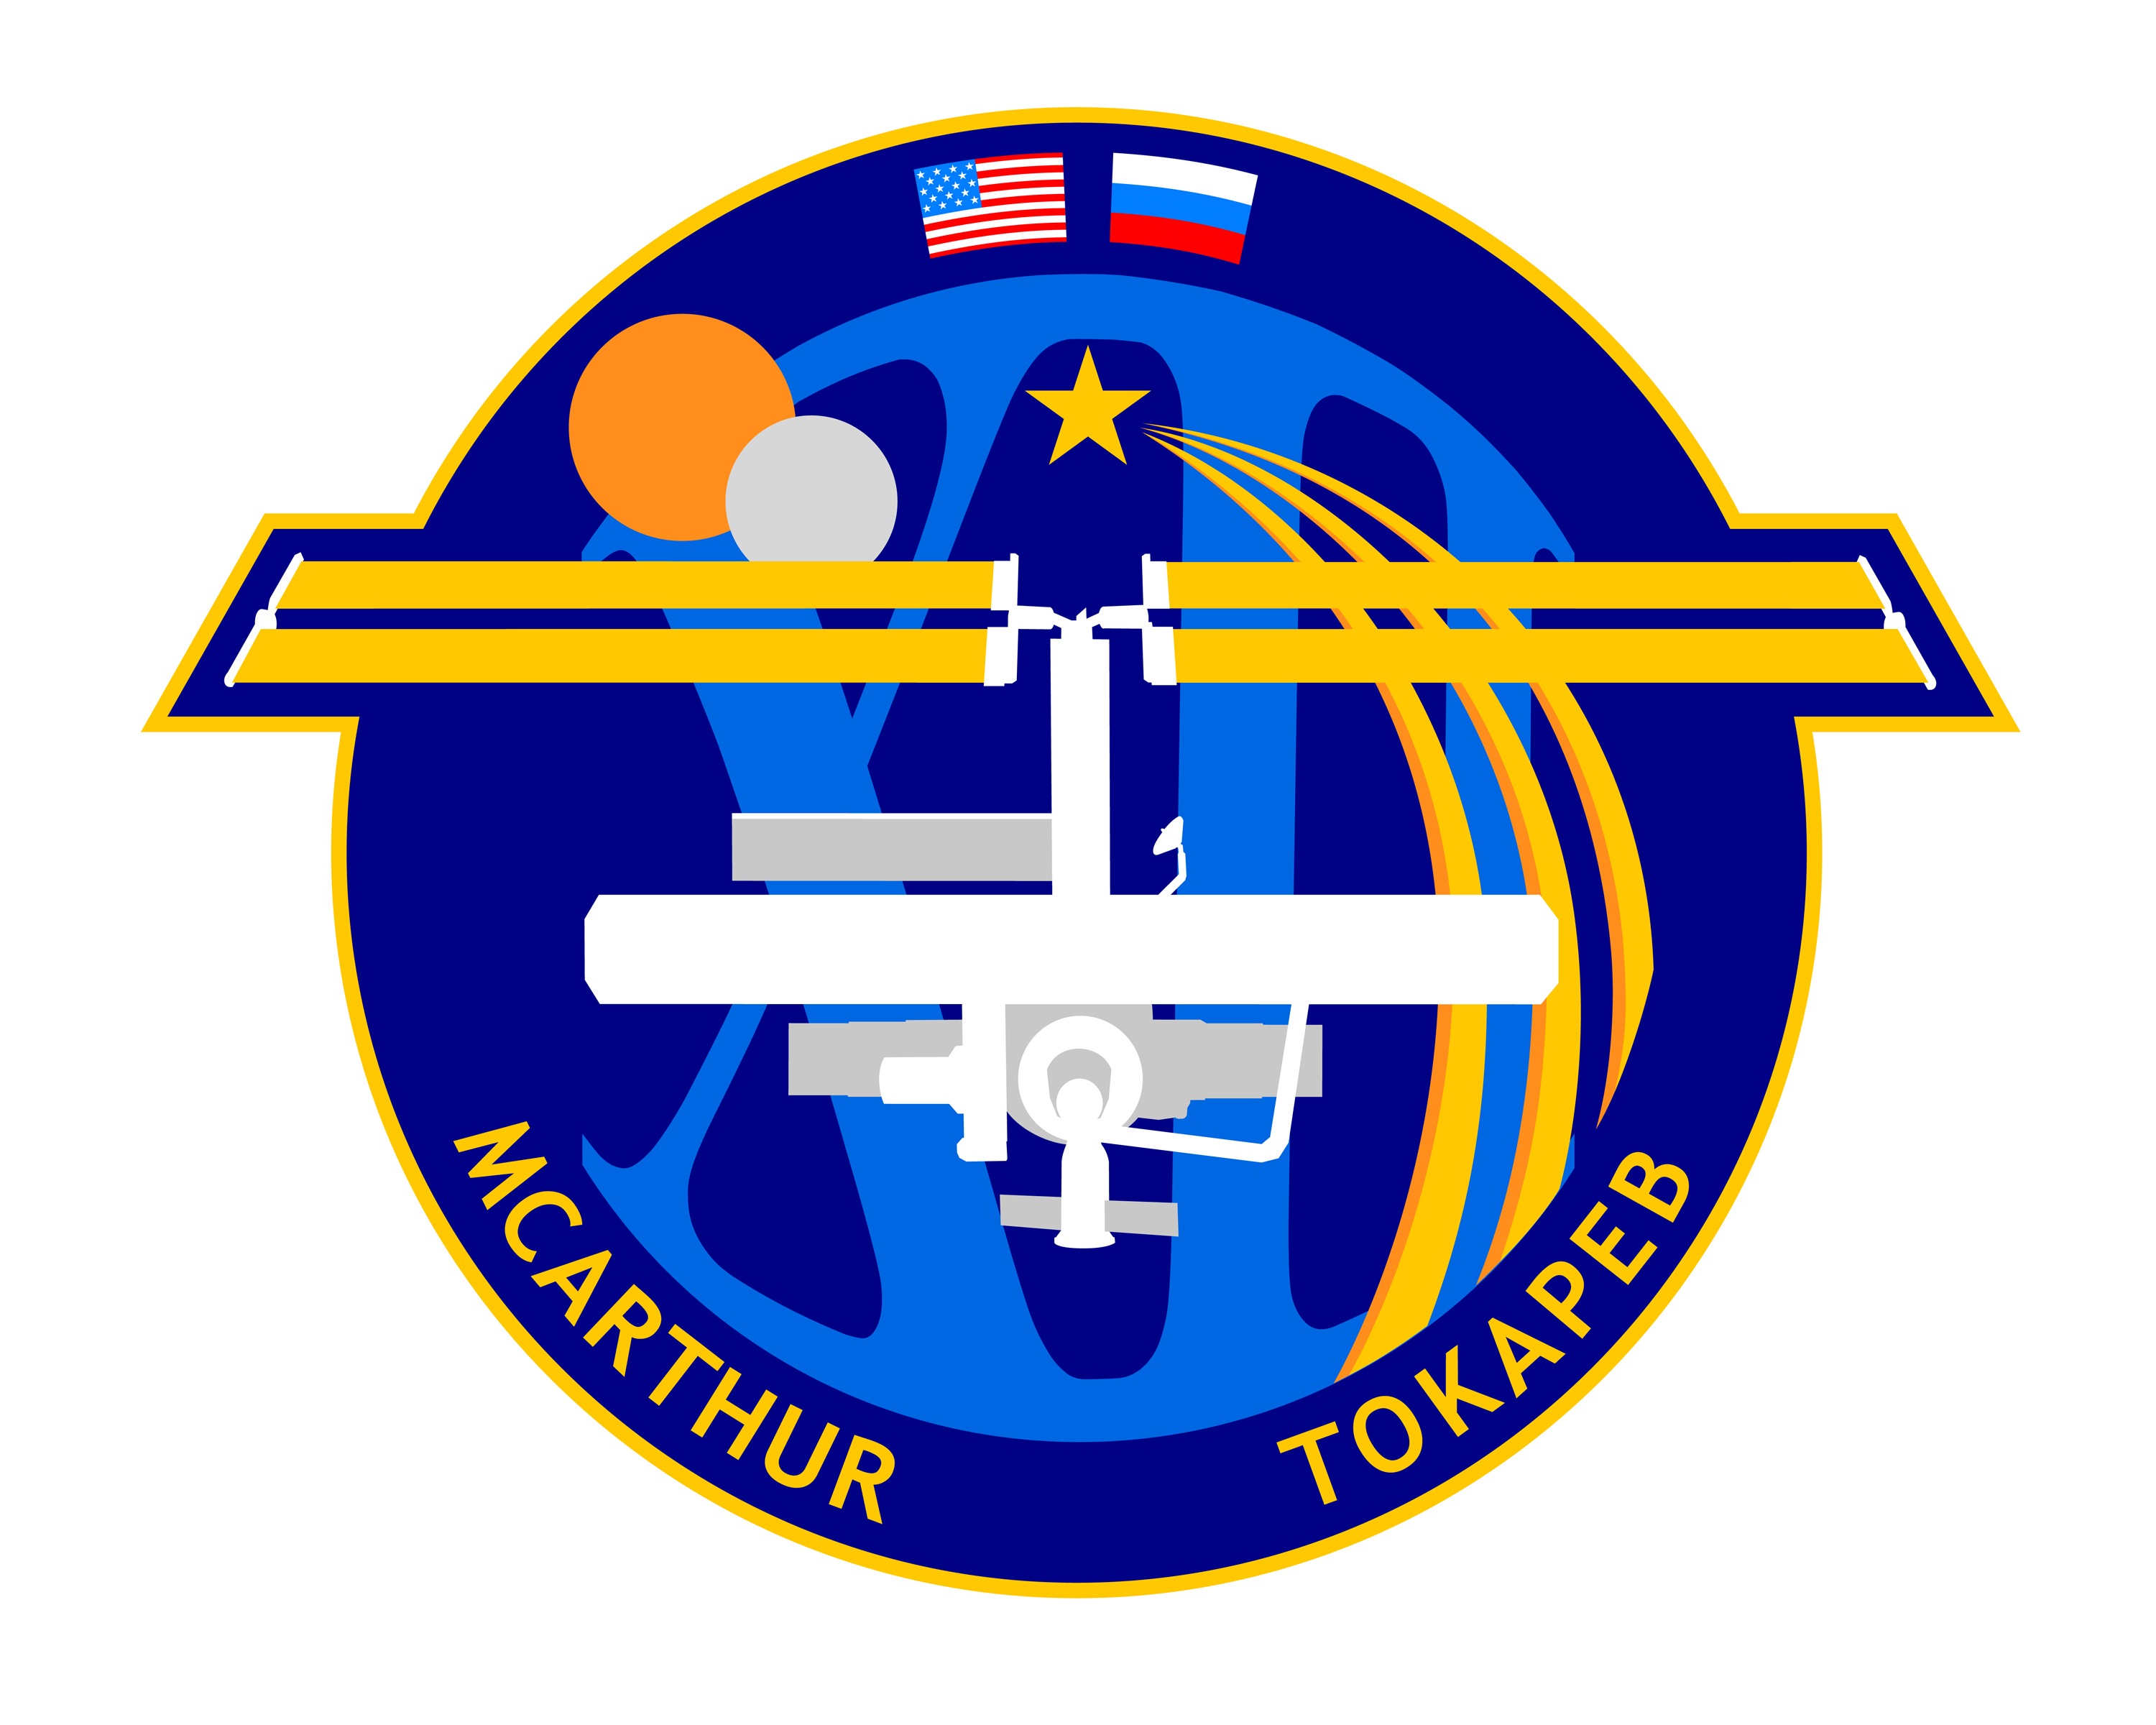 ISS Expedition 12 patch